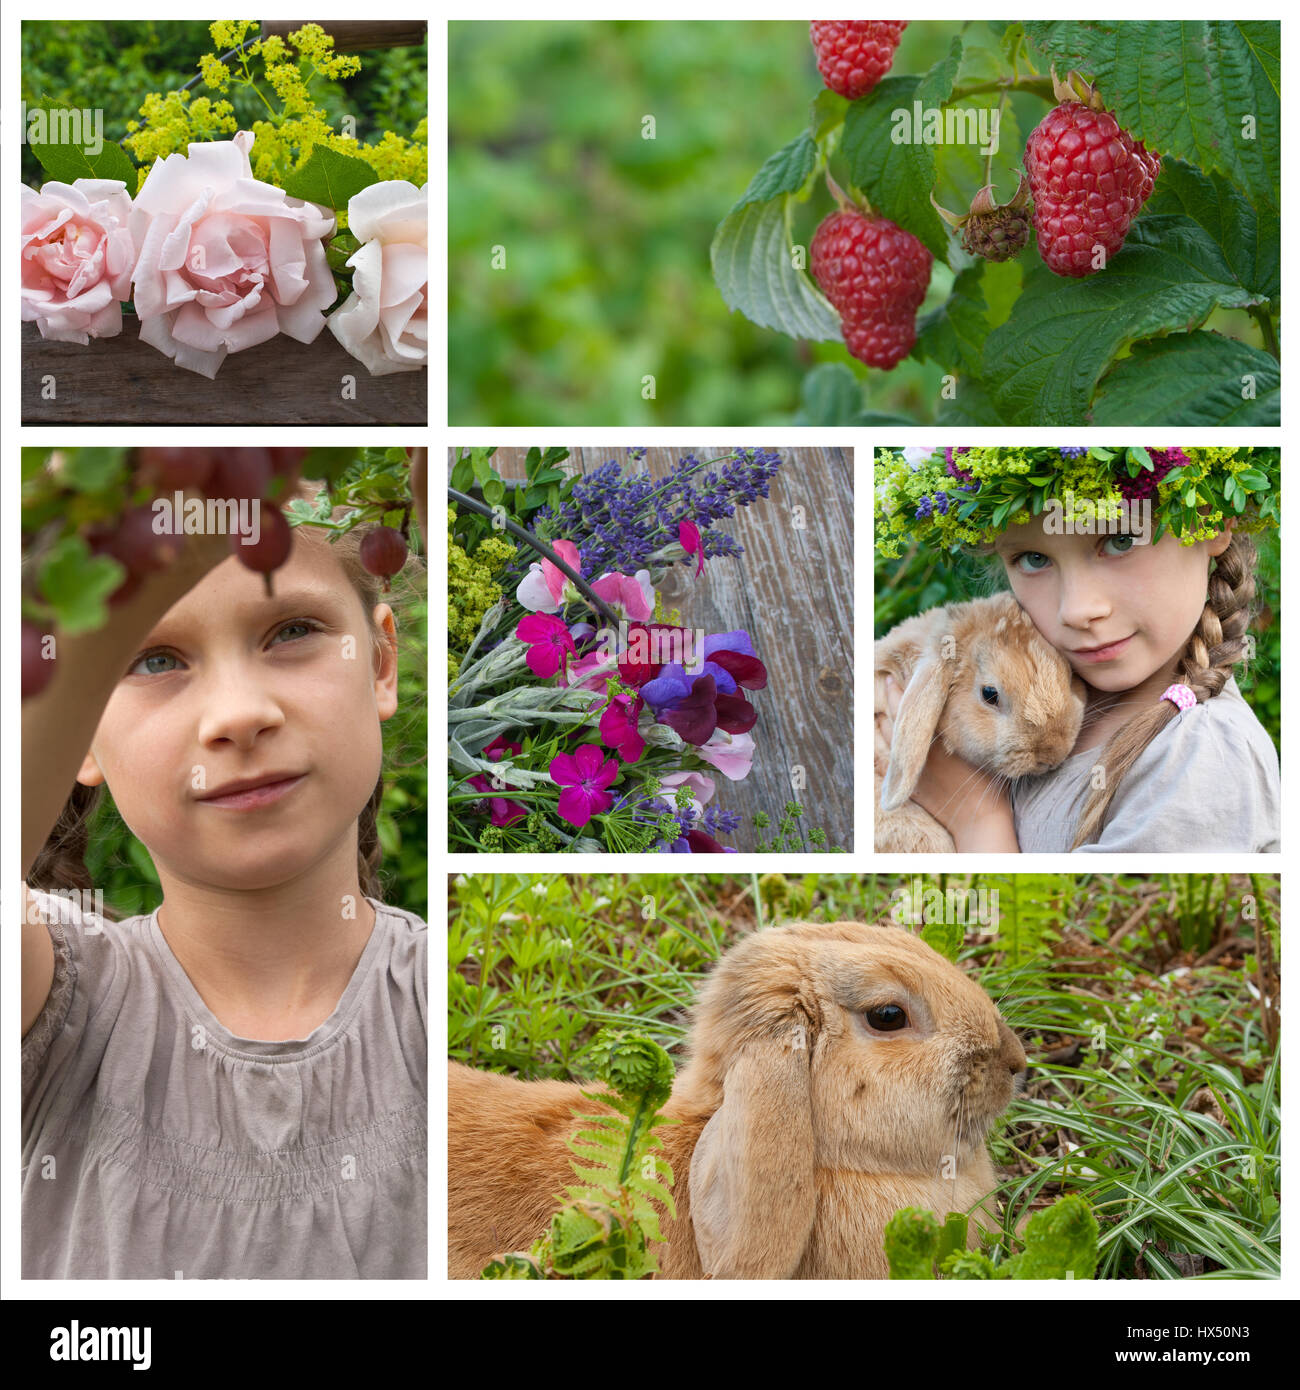 Collage with young girl in garden Stock Photo